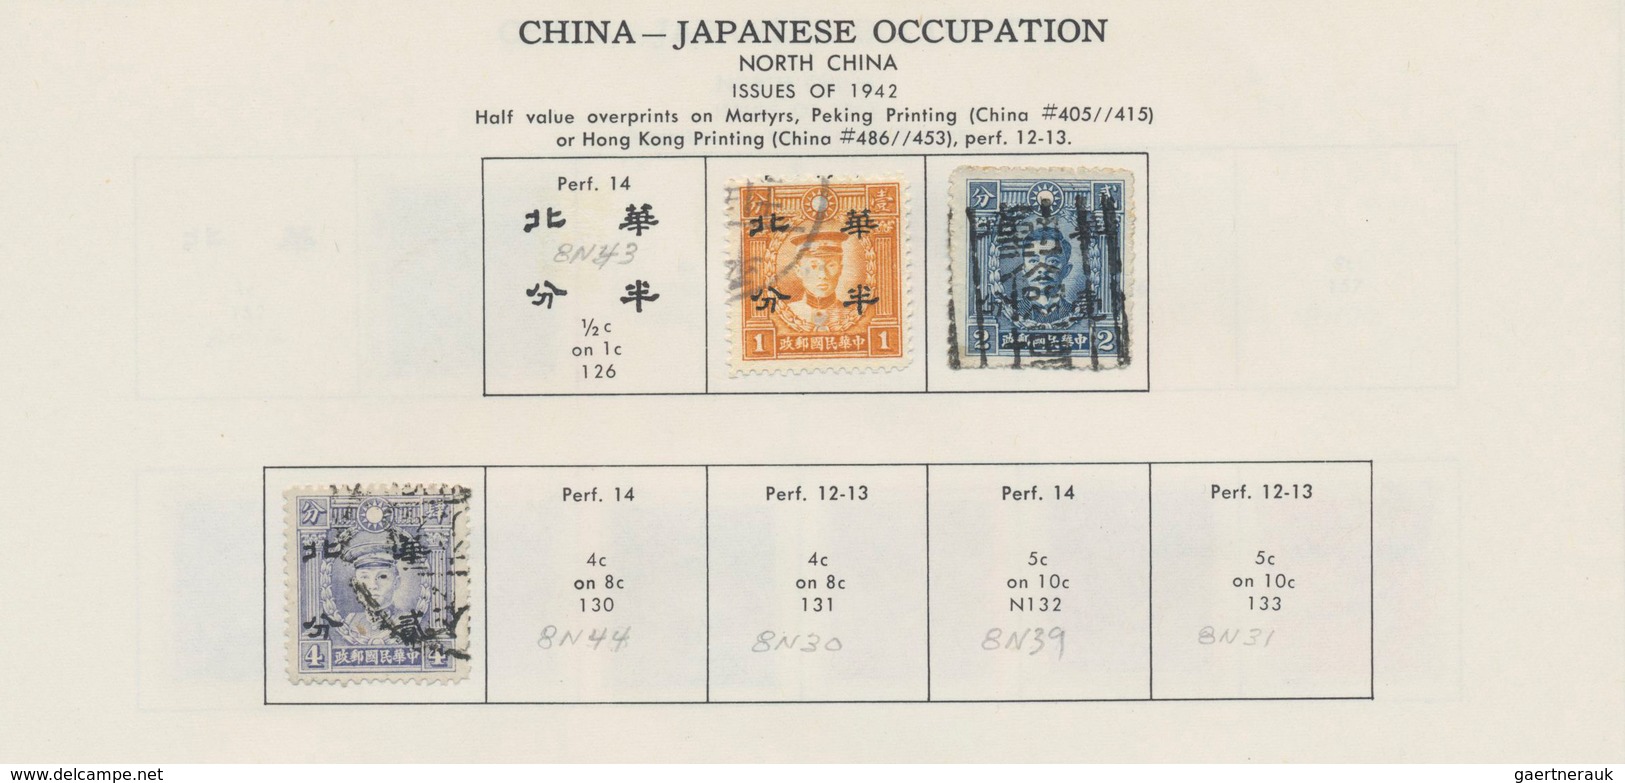 Japanische Besetzung WK II - China: China, 1941/45, mint and used of all districts on Minkus pages a